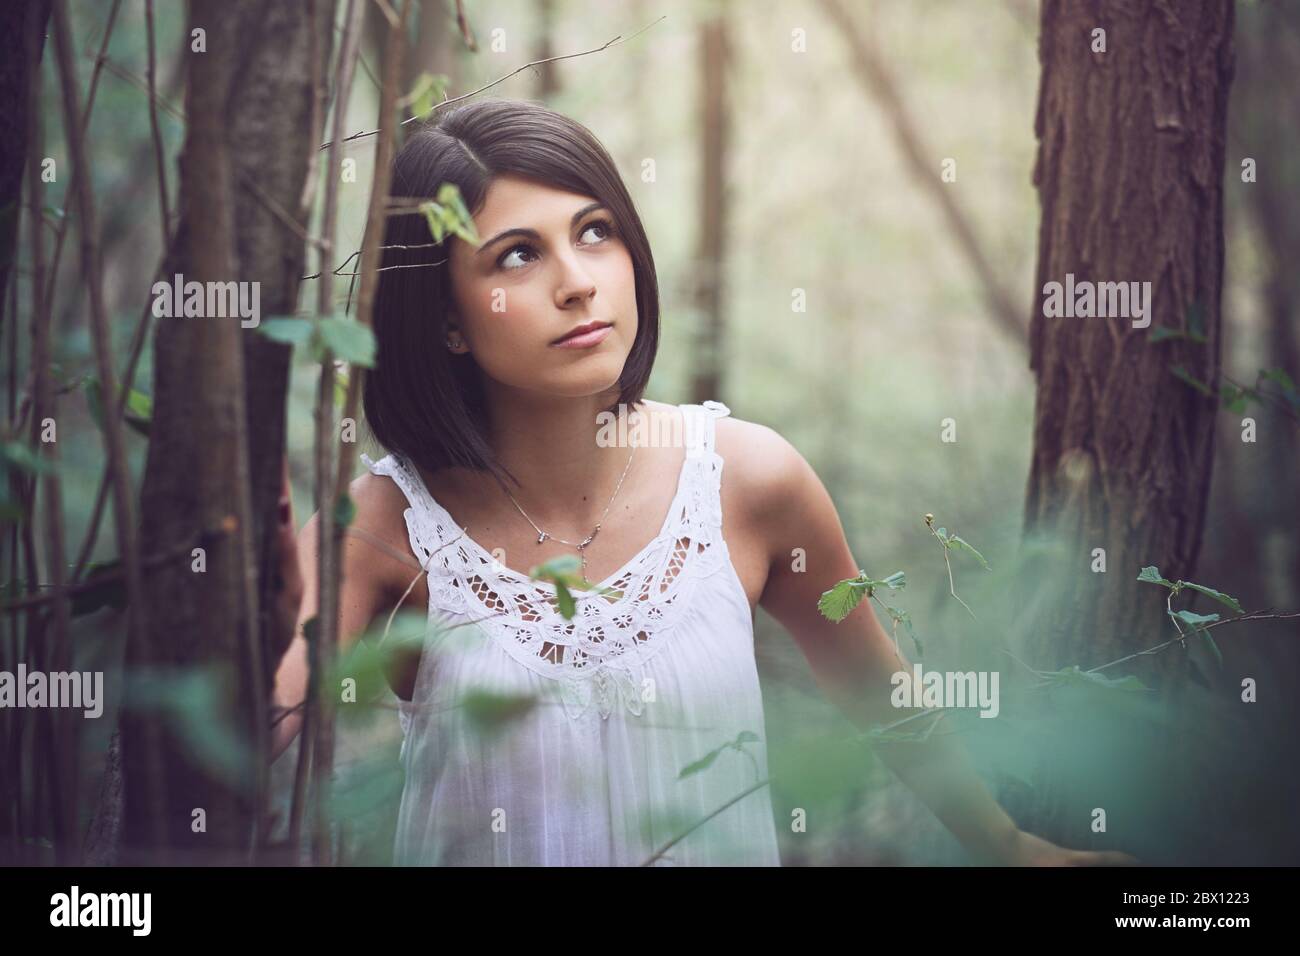 Beautiful woman portrait in soft light forest Stock Photo